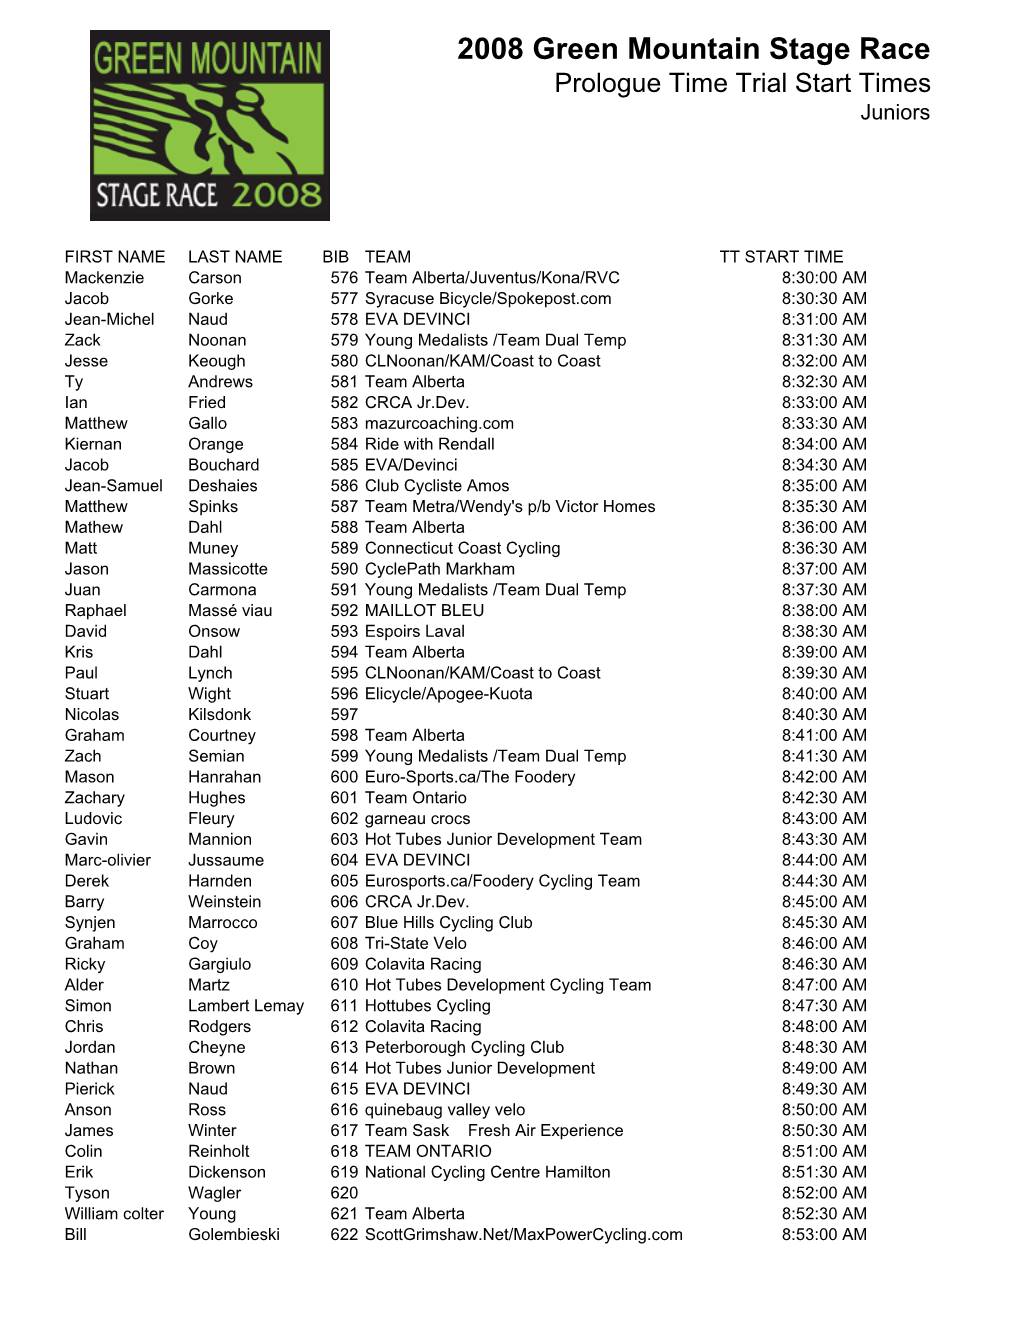 2008 Green Mountain Stage Race Prologue Time Trial Start Times Juniors